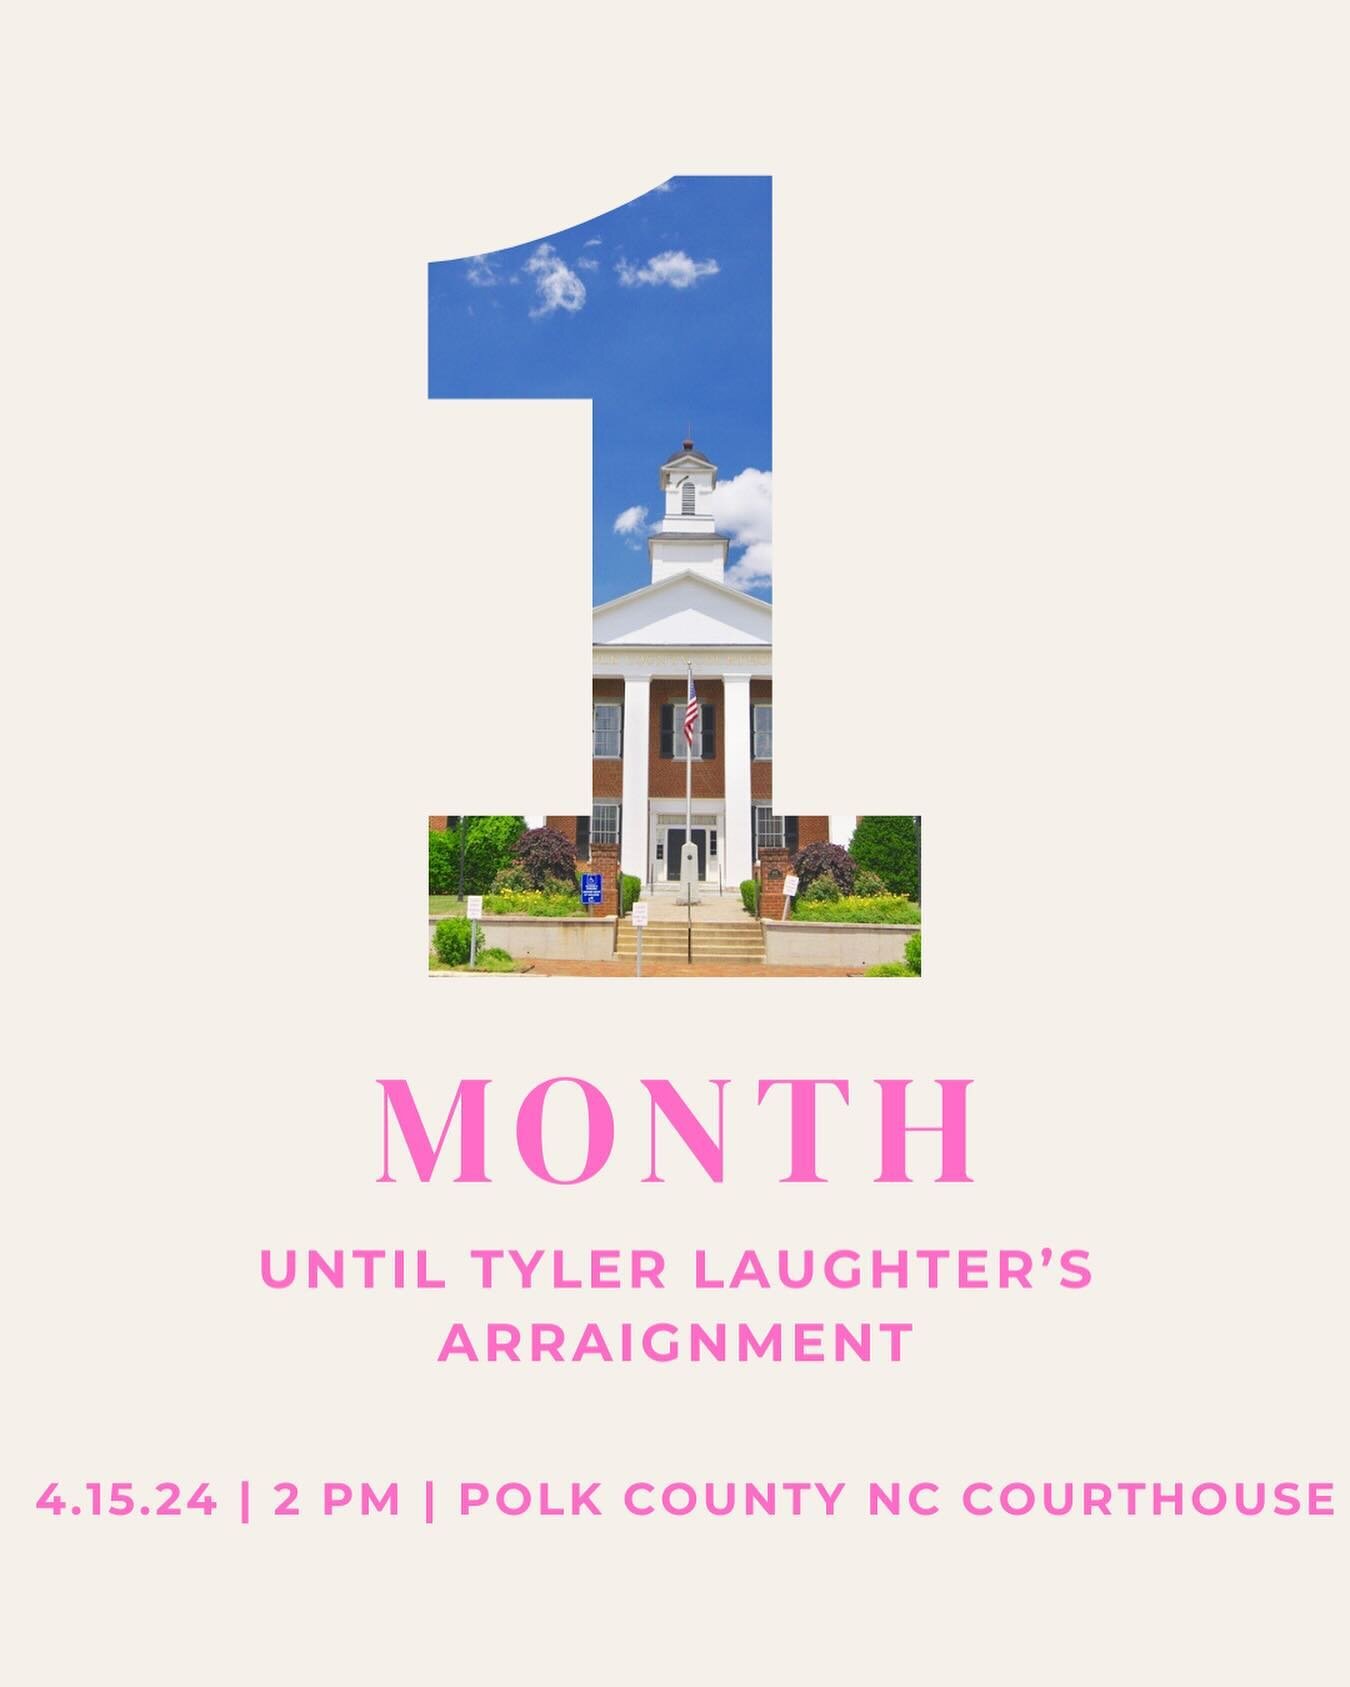 1 month until Tyler Laughter&rsquo;s next court date.  We will be there for Talia. Join us on 4/15/24 at 2 pm.